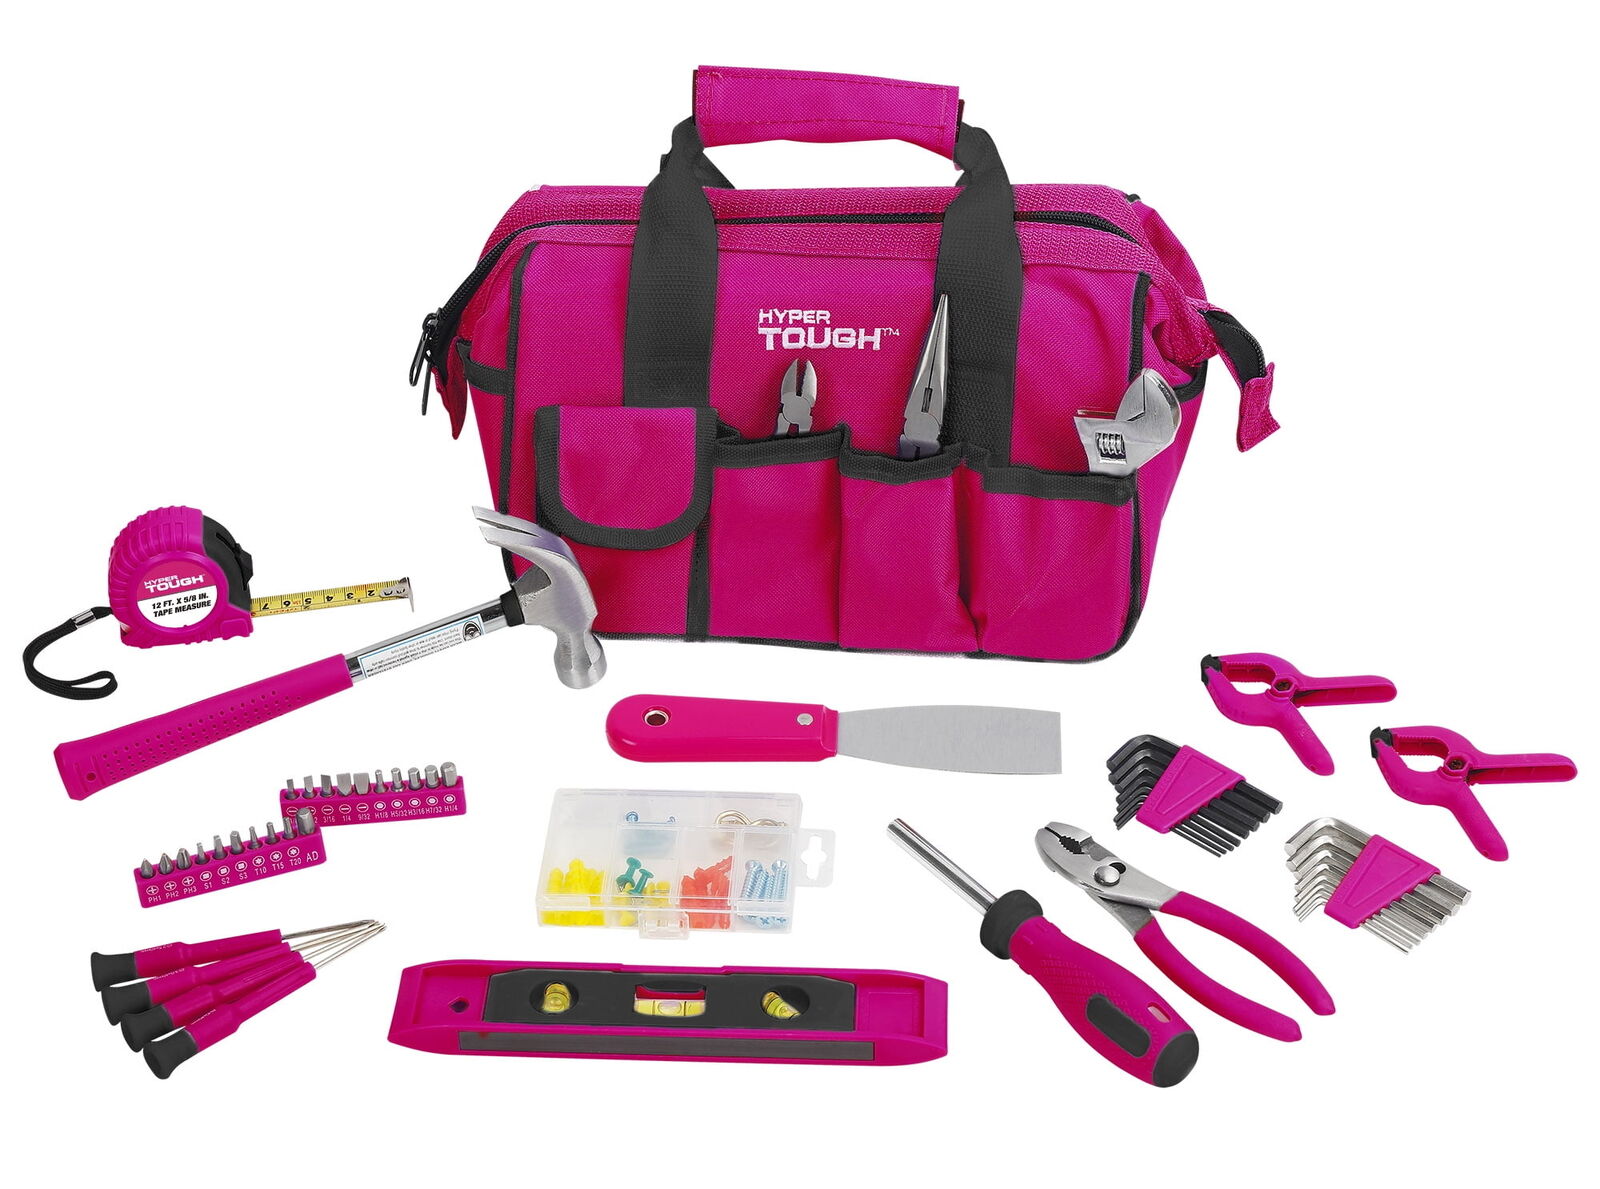 89-Piece Pink Household Tool Set, 9201